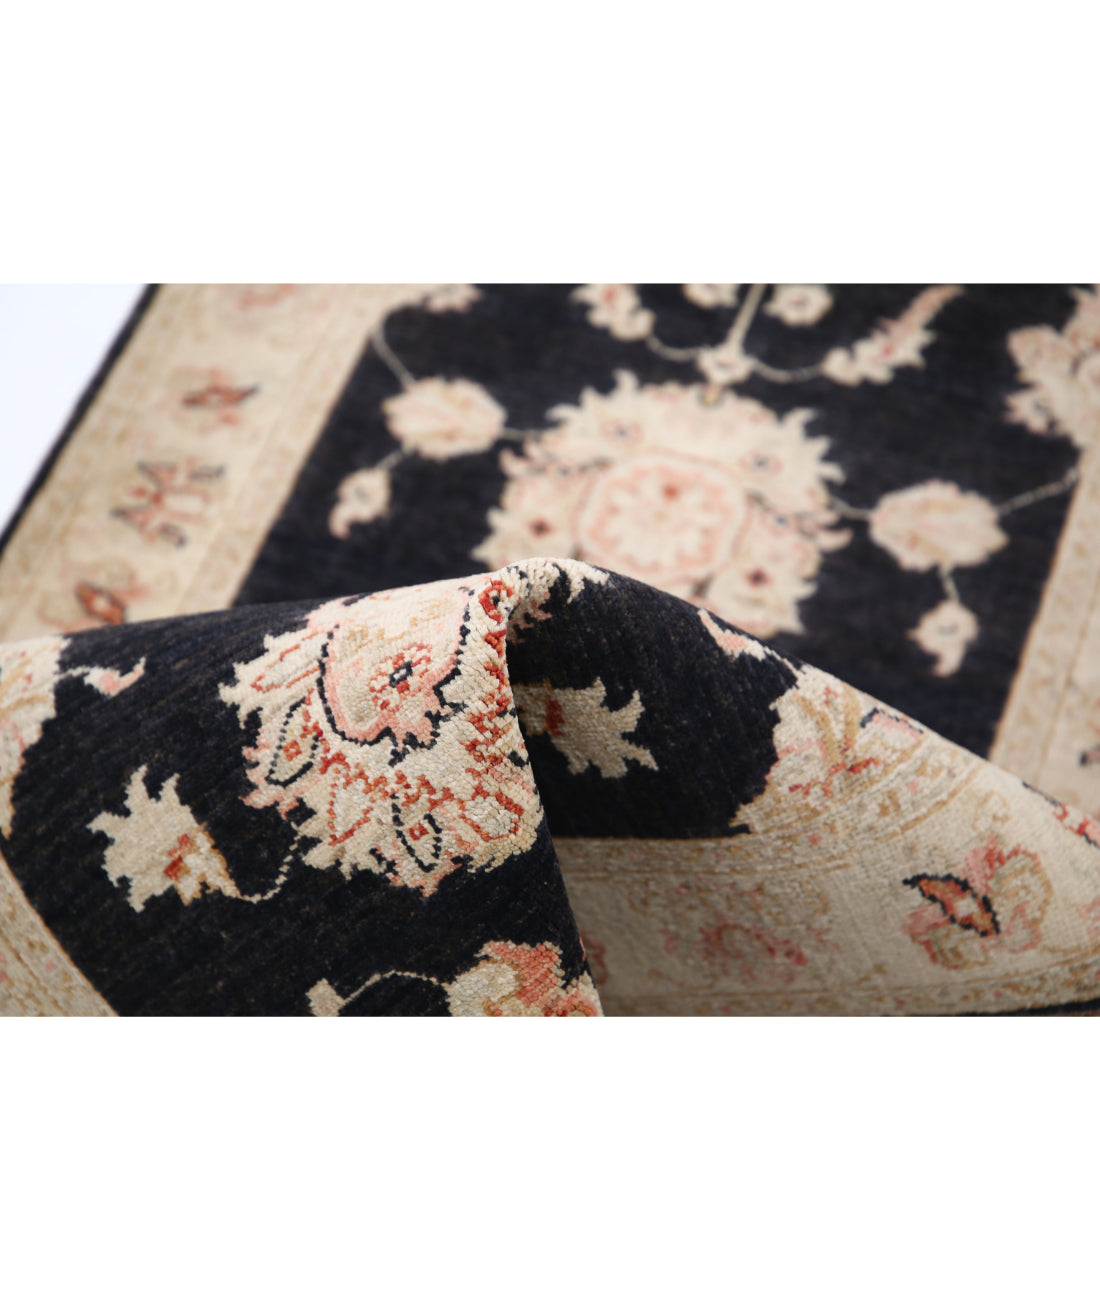 Ziegler 2'7'' X 9'7'' Hand-Knotted Wool Rug 2'7'' x 9'7'' (78 X 288) / Black / Ivory